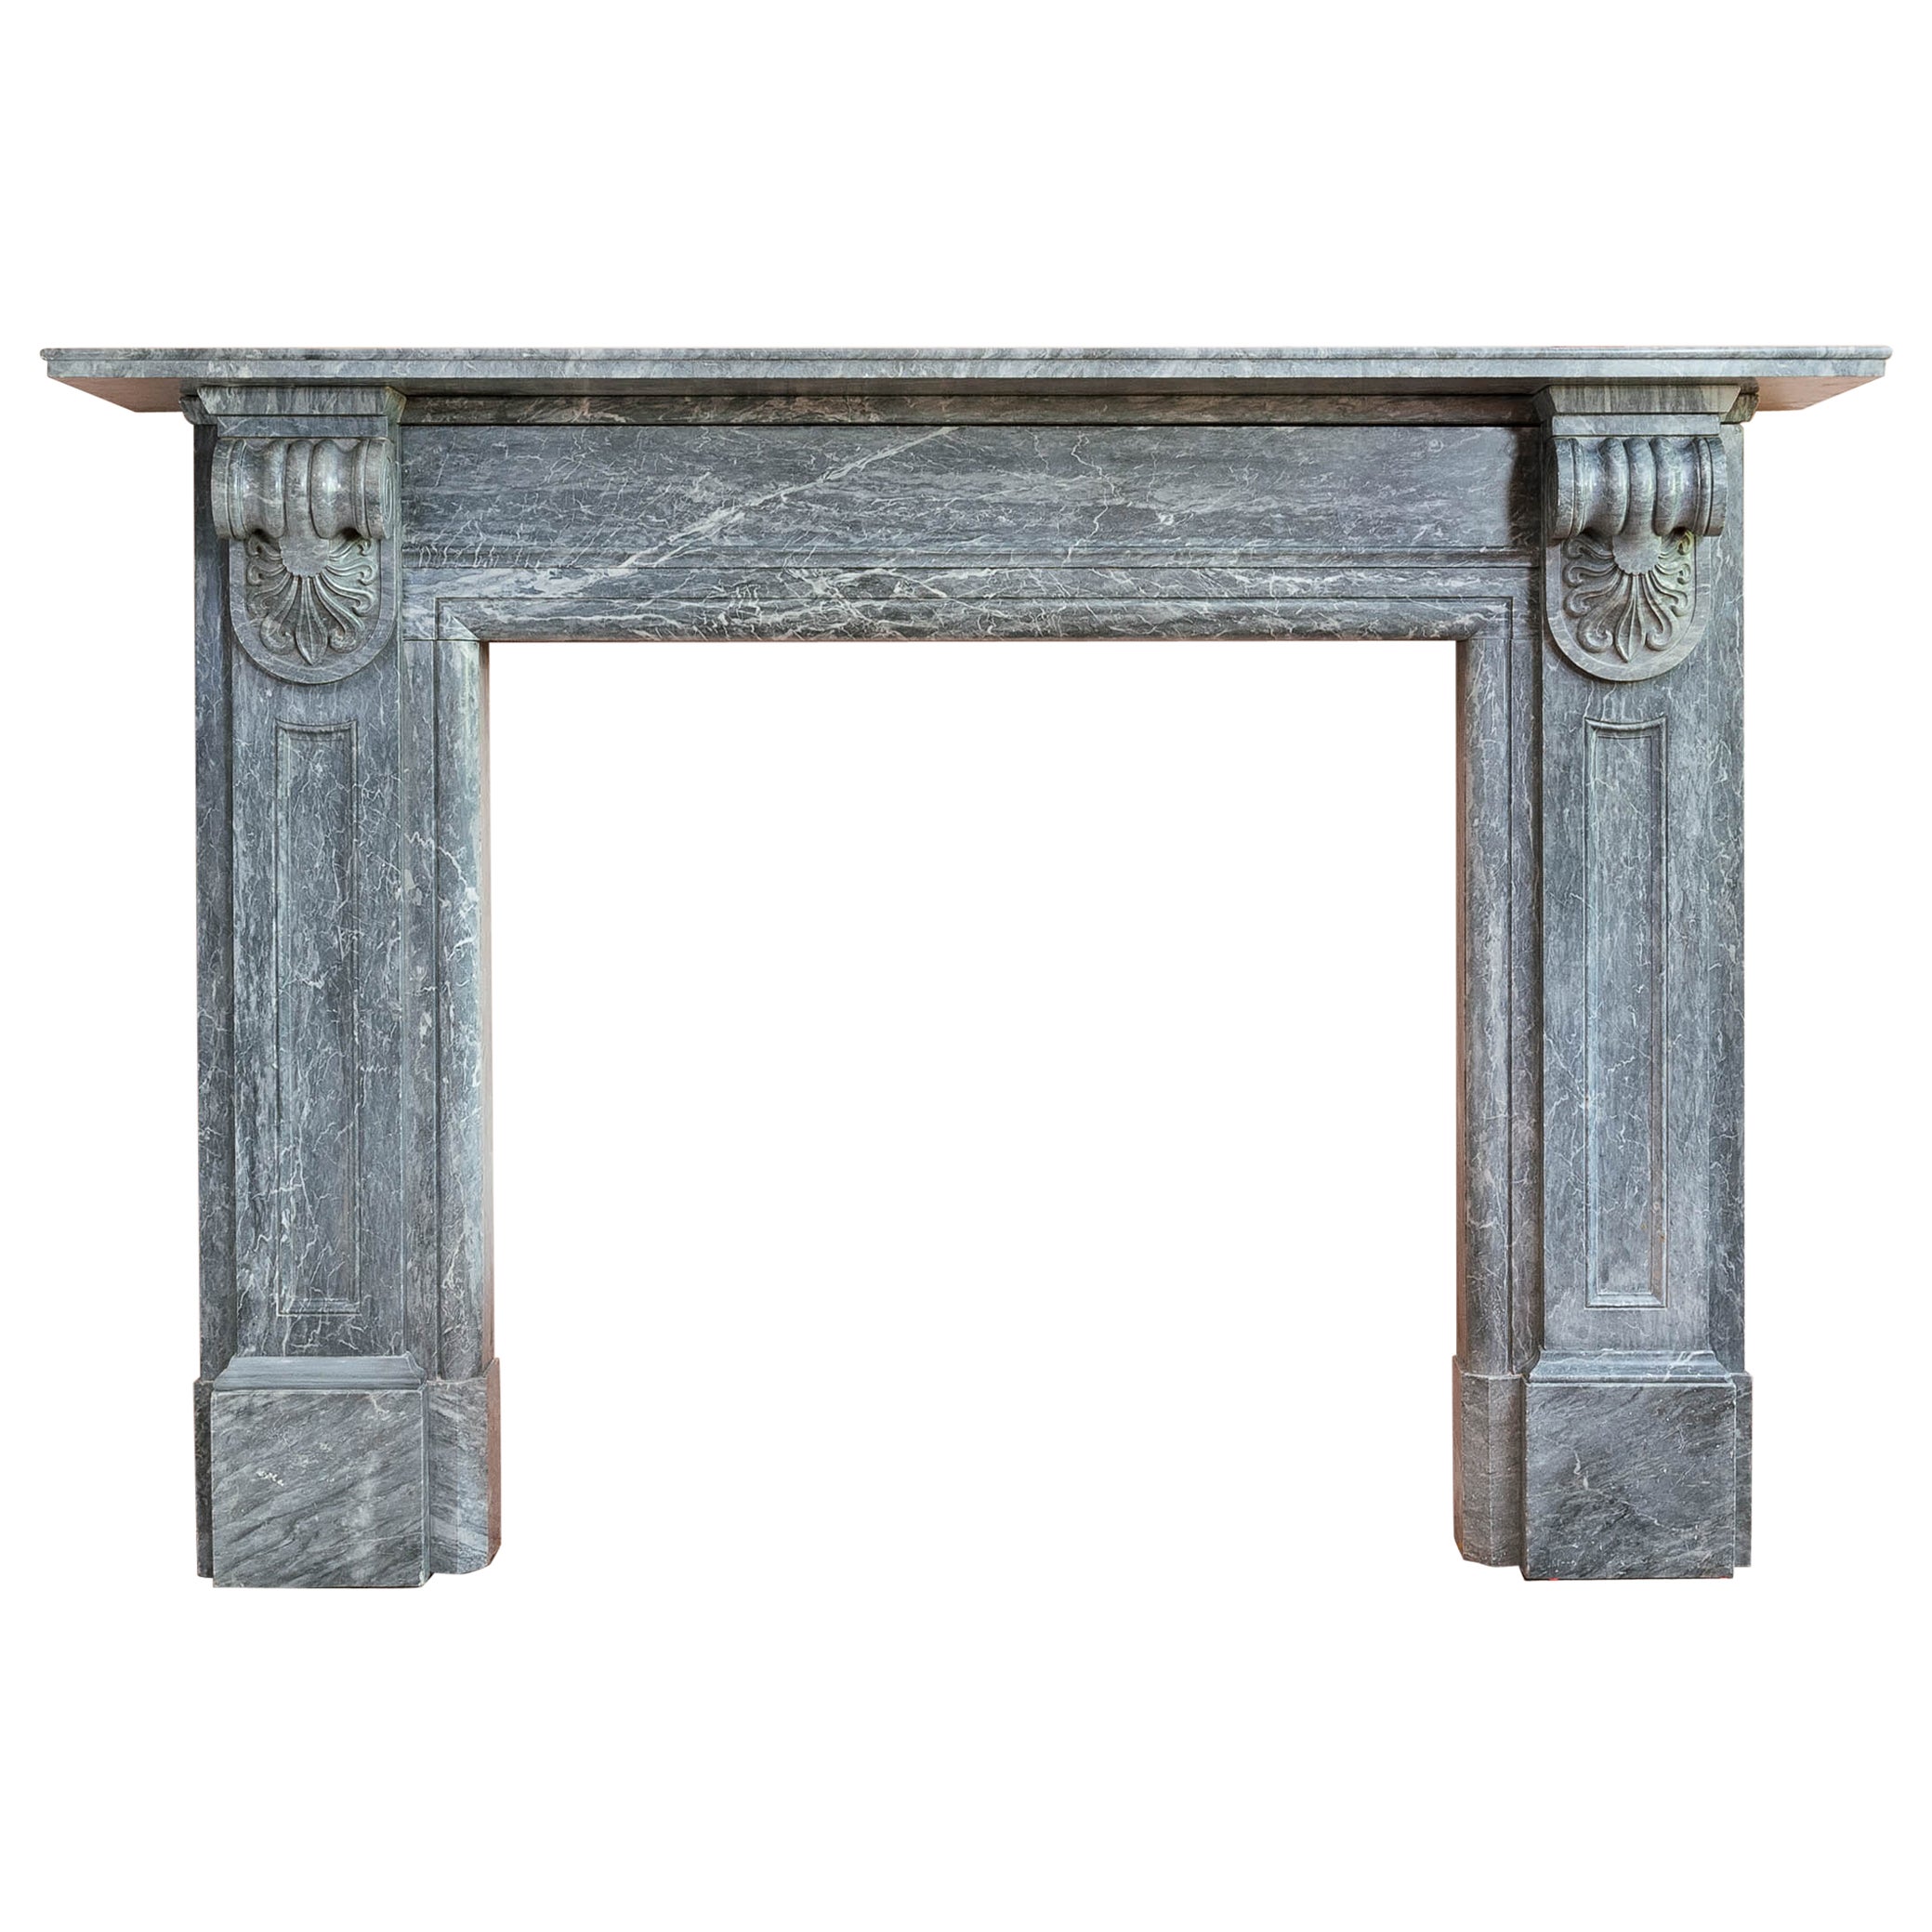 An Early 19th Century Neo-Grecian Bardiglio Marble Fireplace For Sale